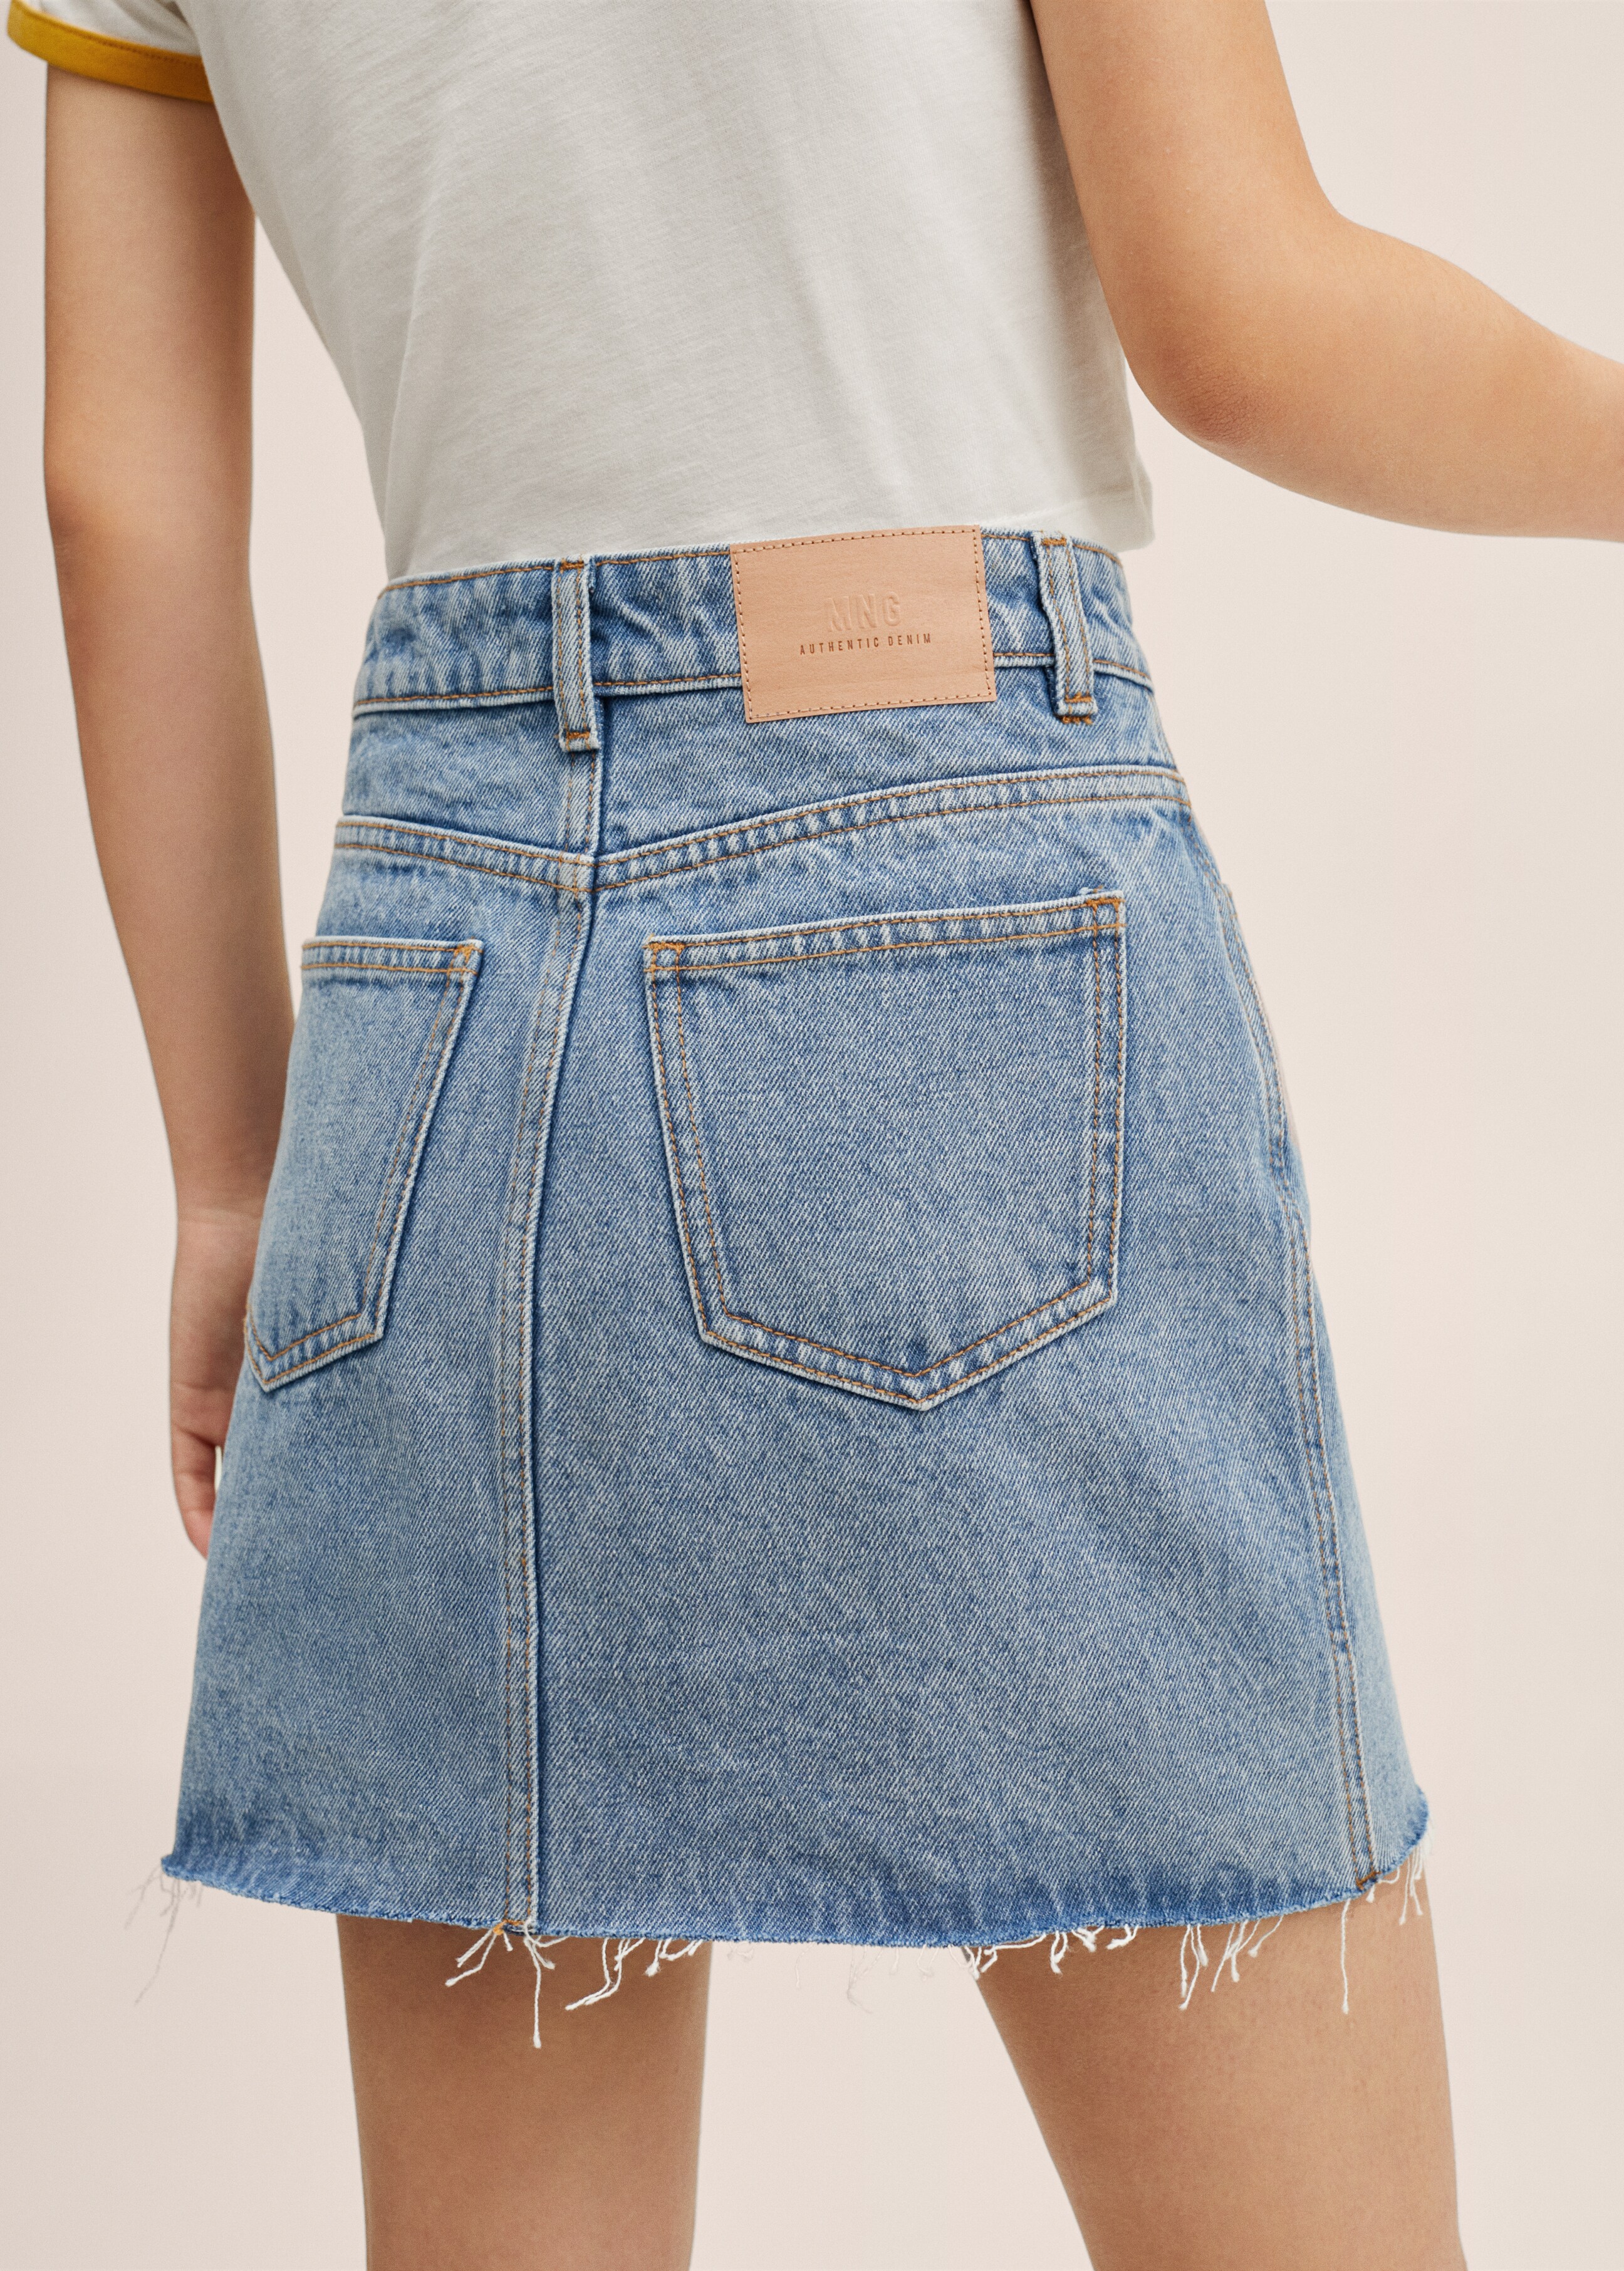 Buttoned denim skirt - Details of the article 2